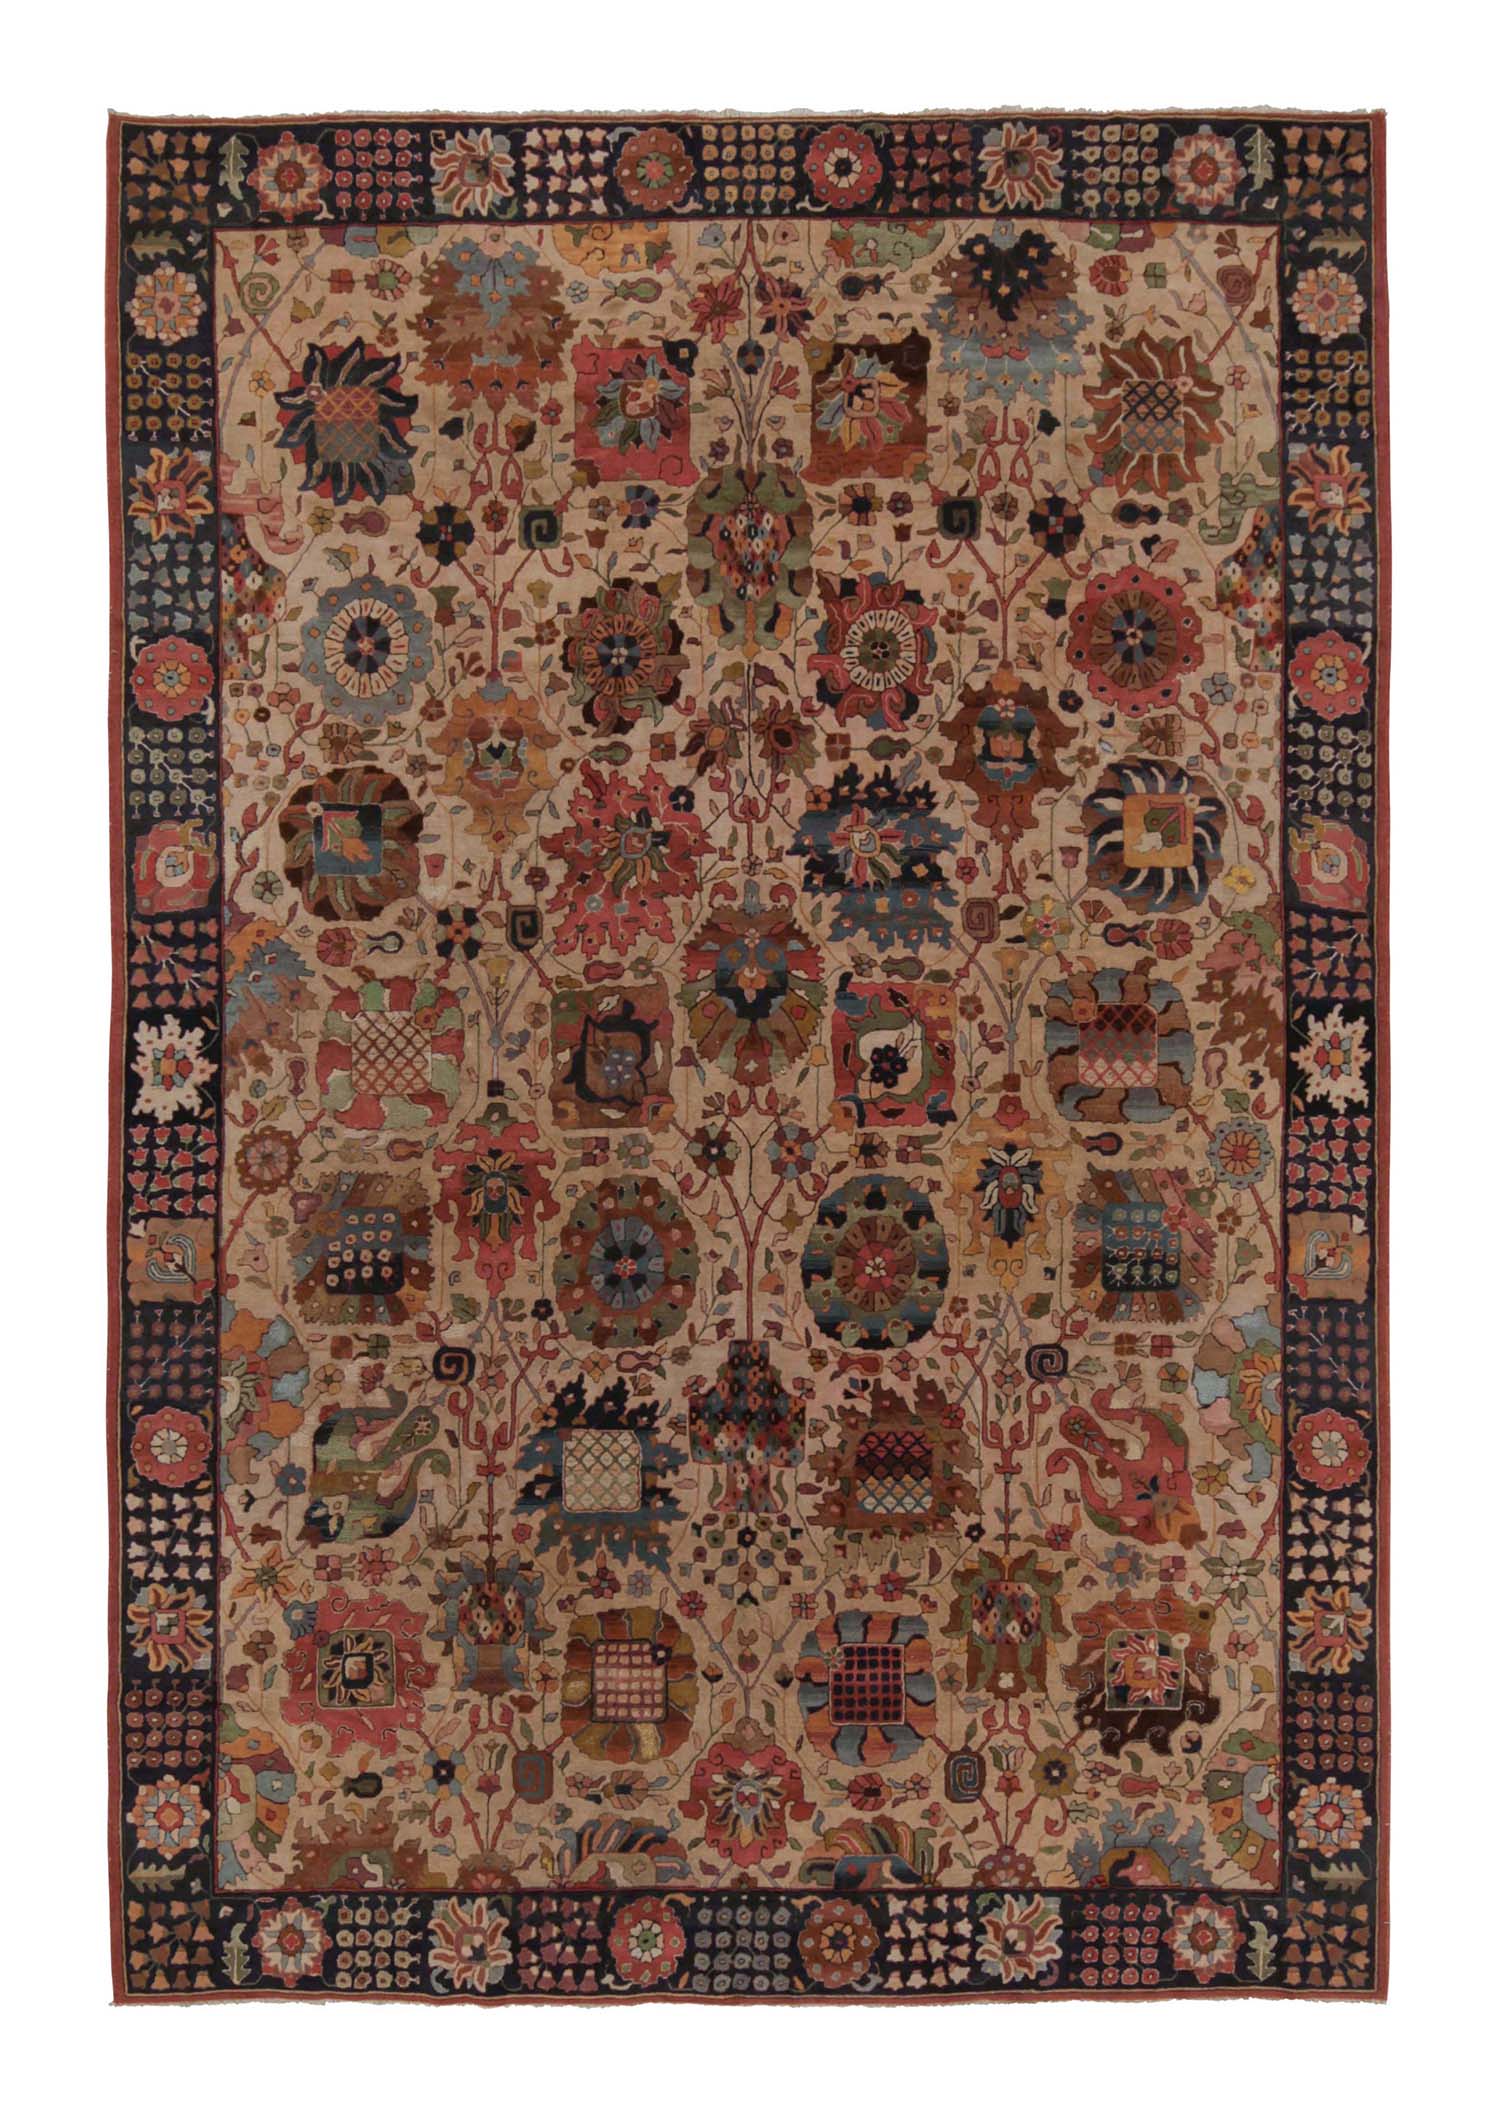 Antique Hand-Hooked Rug in Brown Red and Green Floral Patterns by Rug & Kilim For Sale